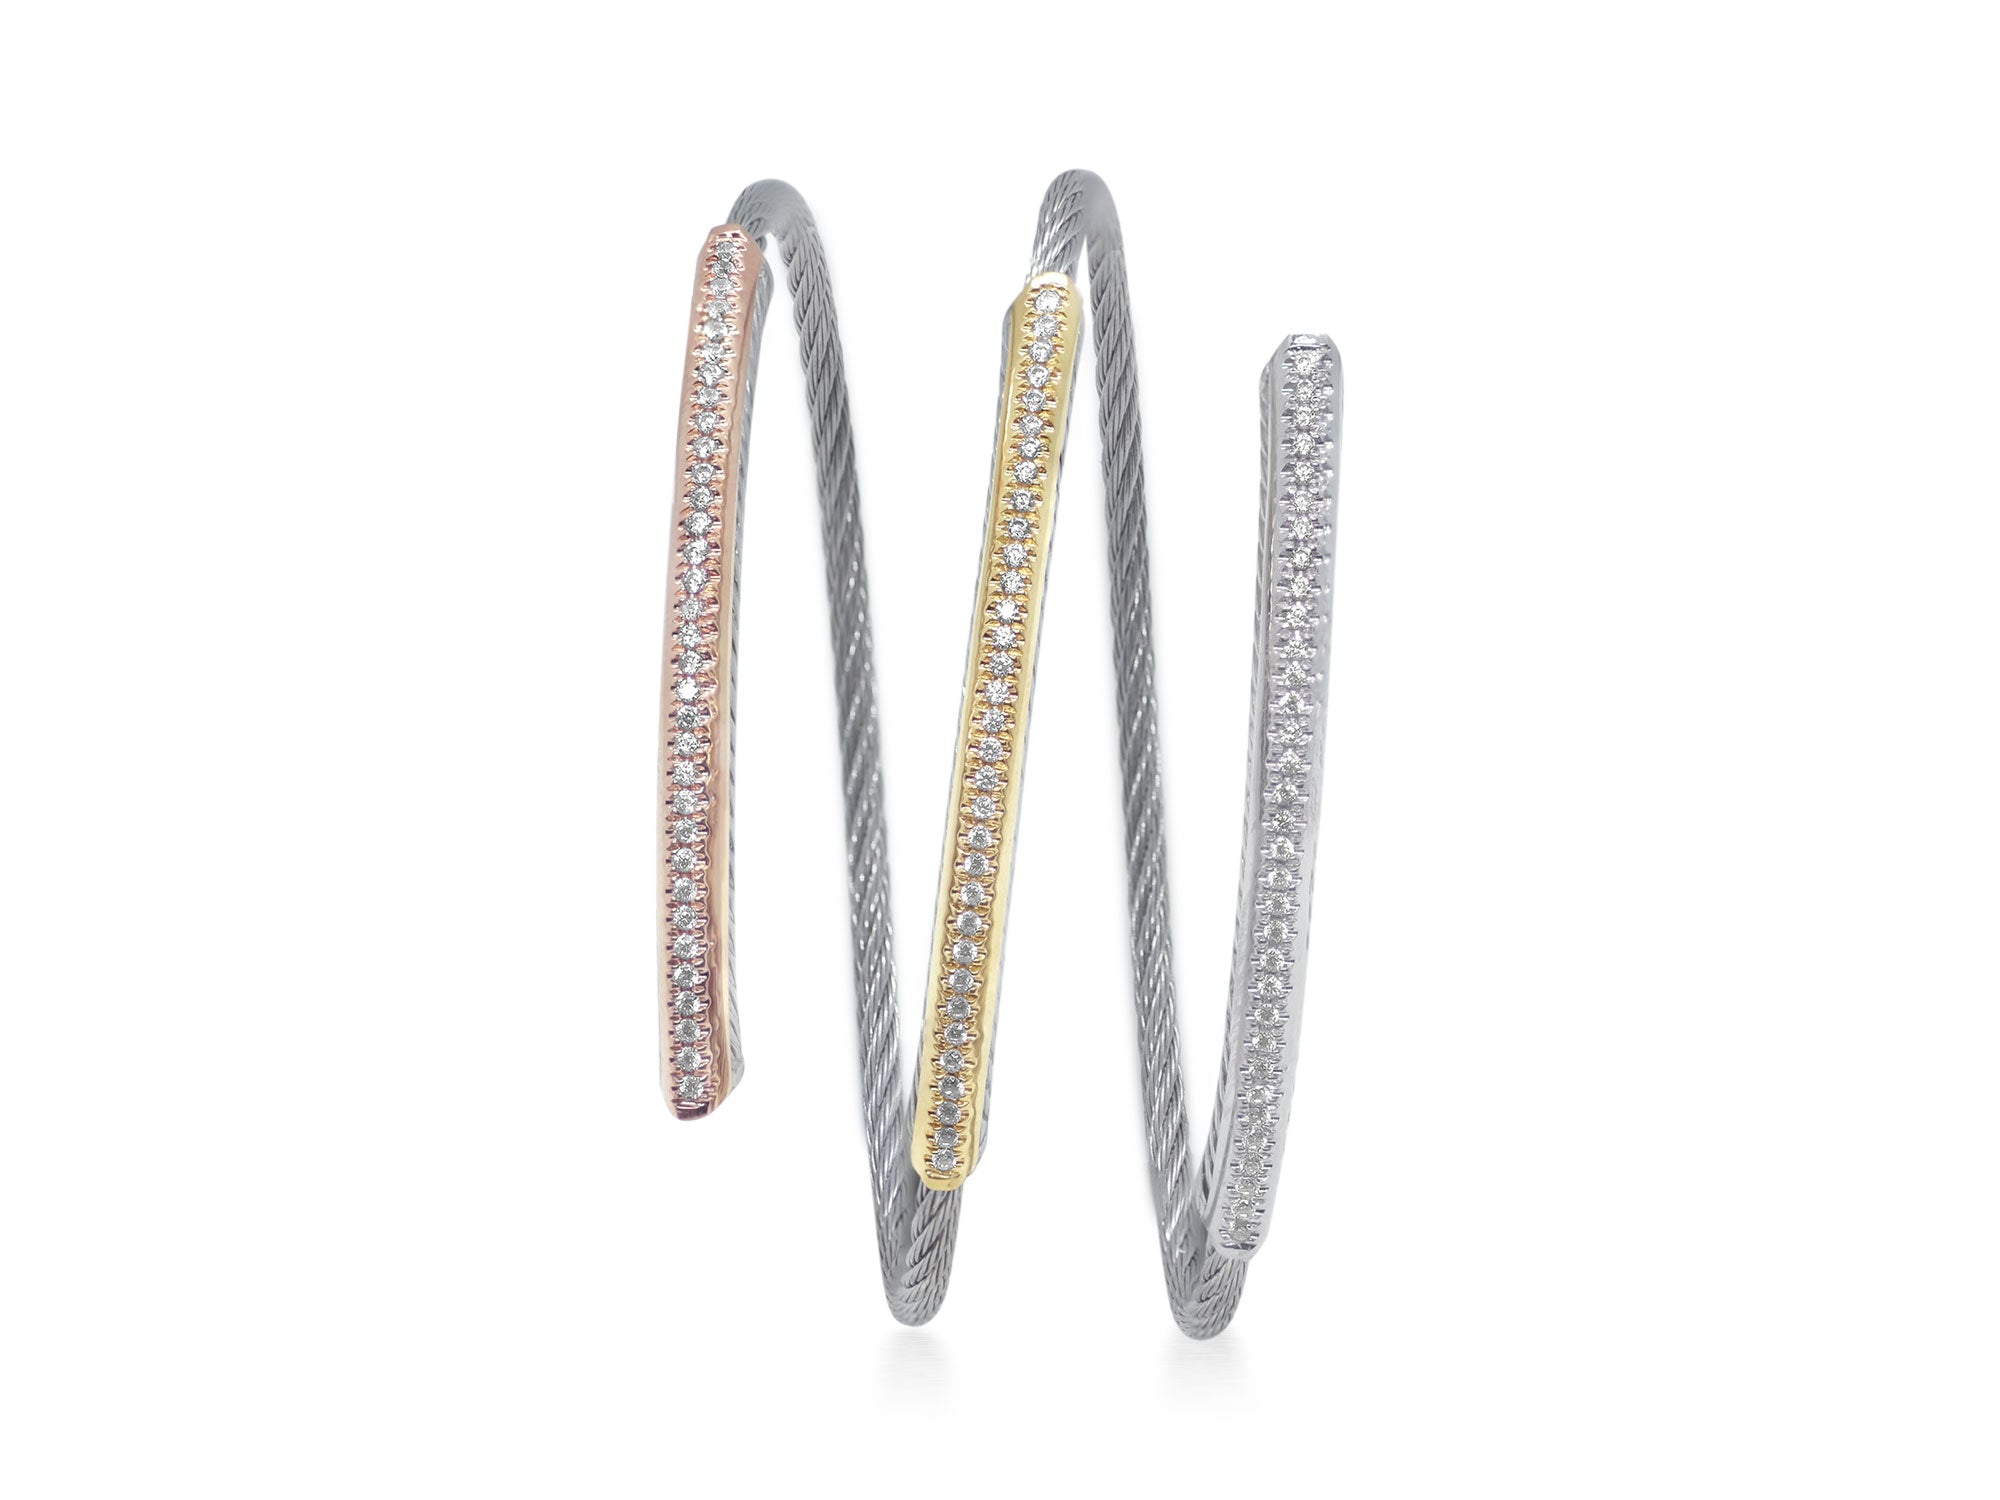 Grey Cable Tri-Wrap Bracelet with 18kt White, Yellow, & Rose Gold & Diamonds